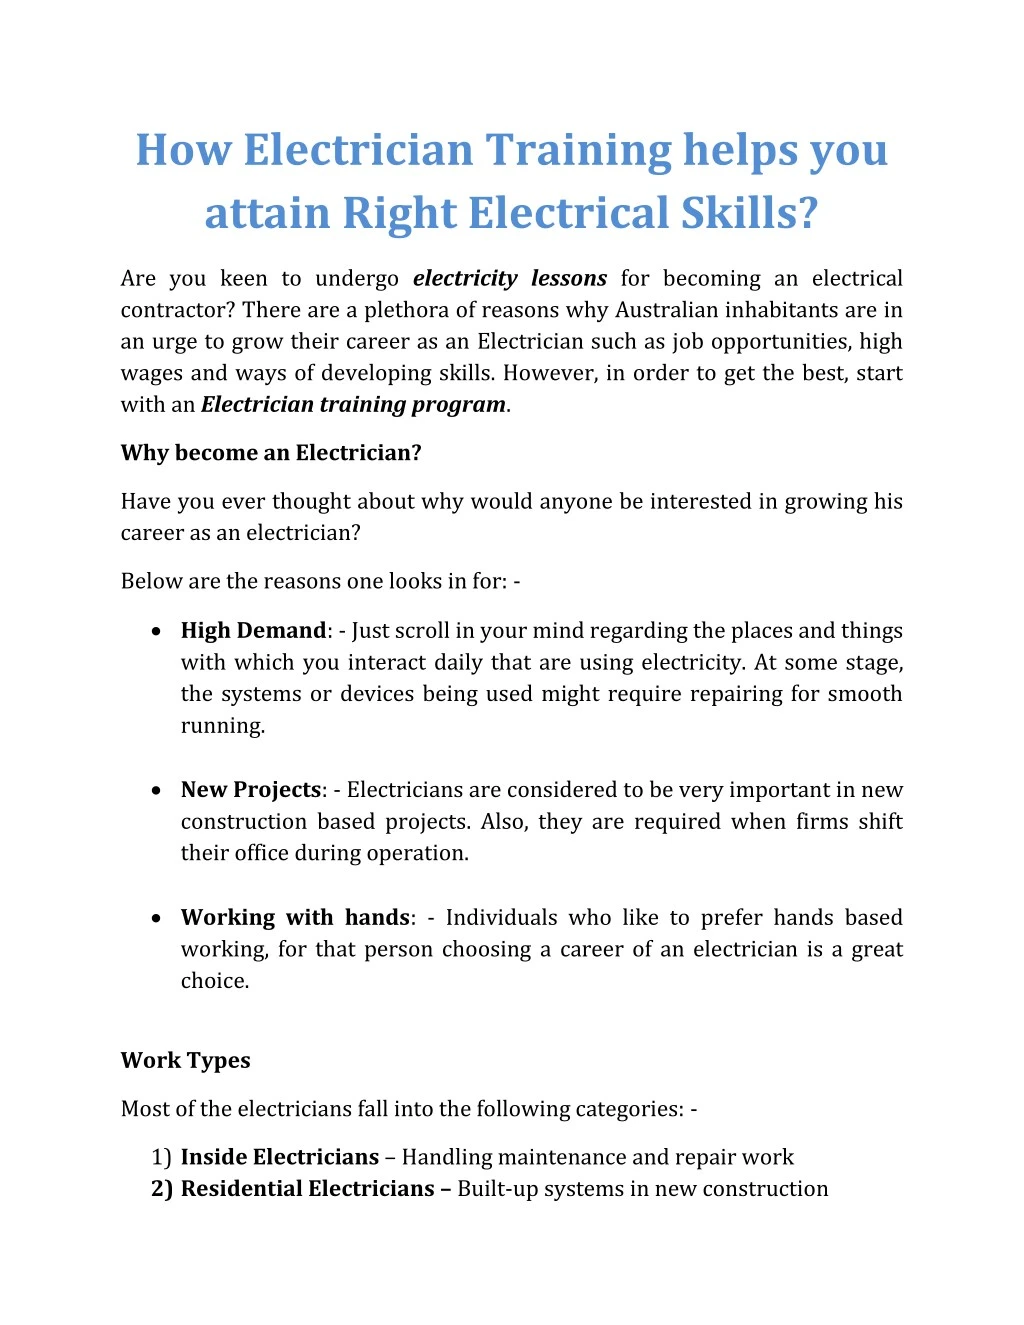 how electrician training helps you attain right